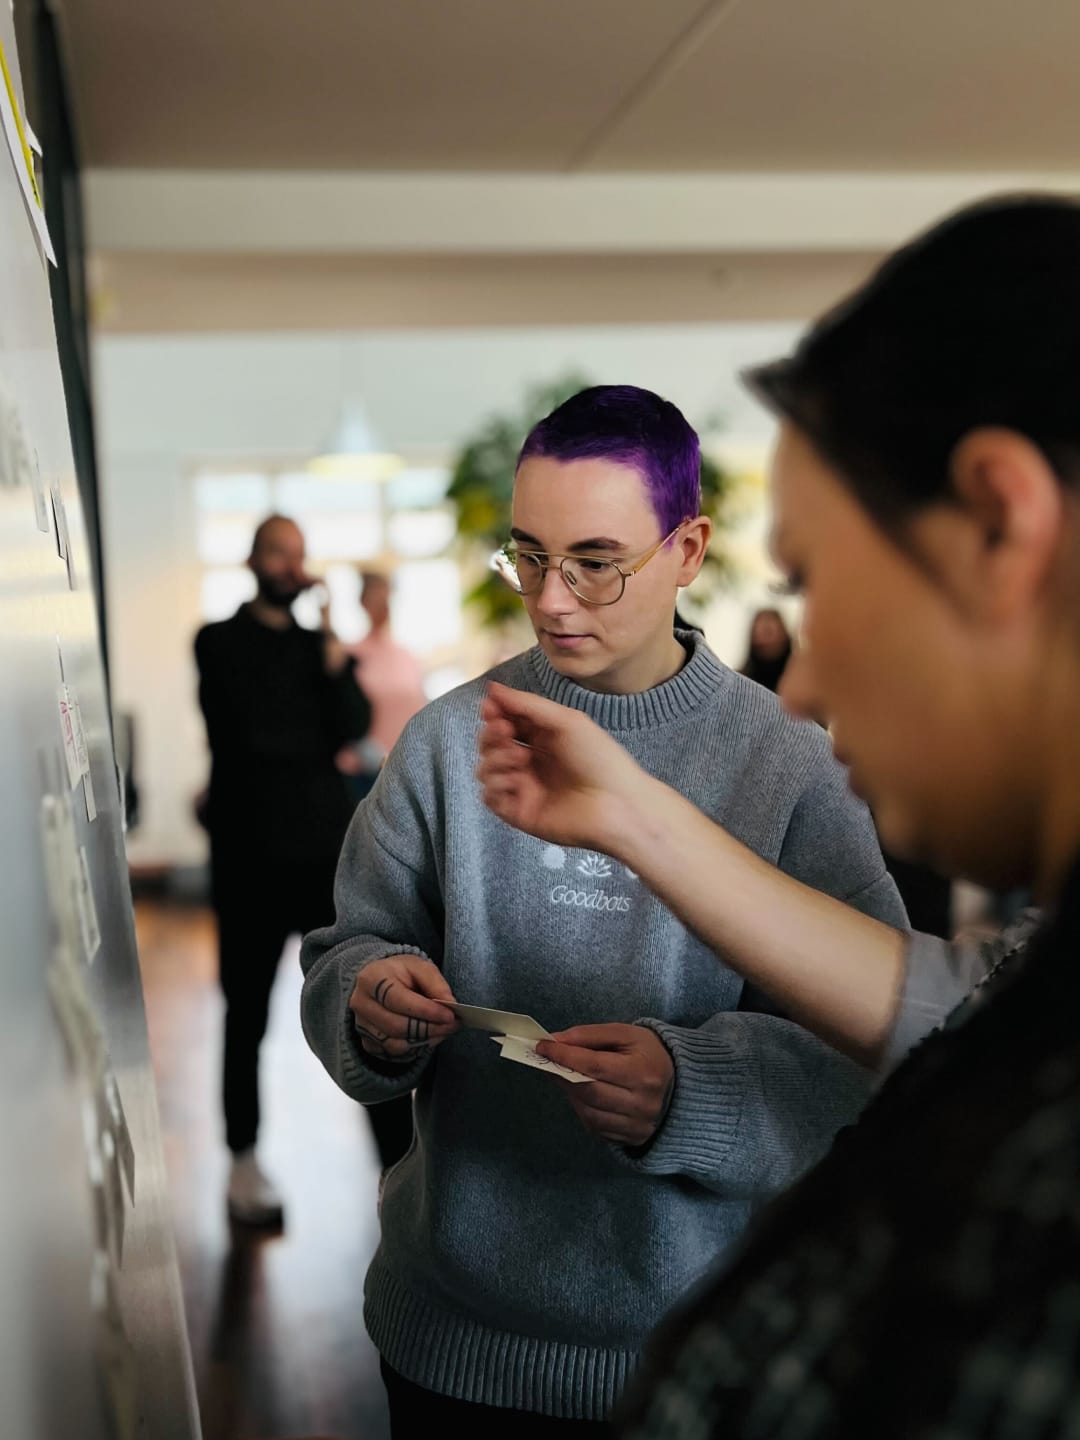 A person with short purple hair stands in front of a whiteboard with sticky notes in hand.